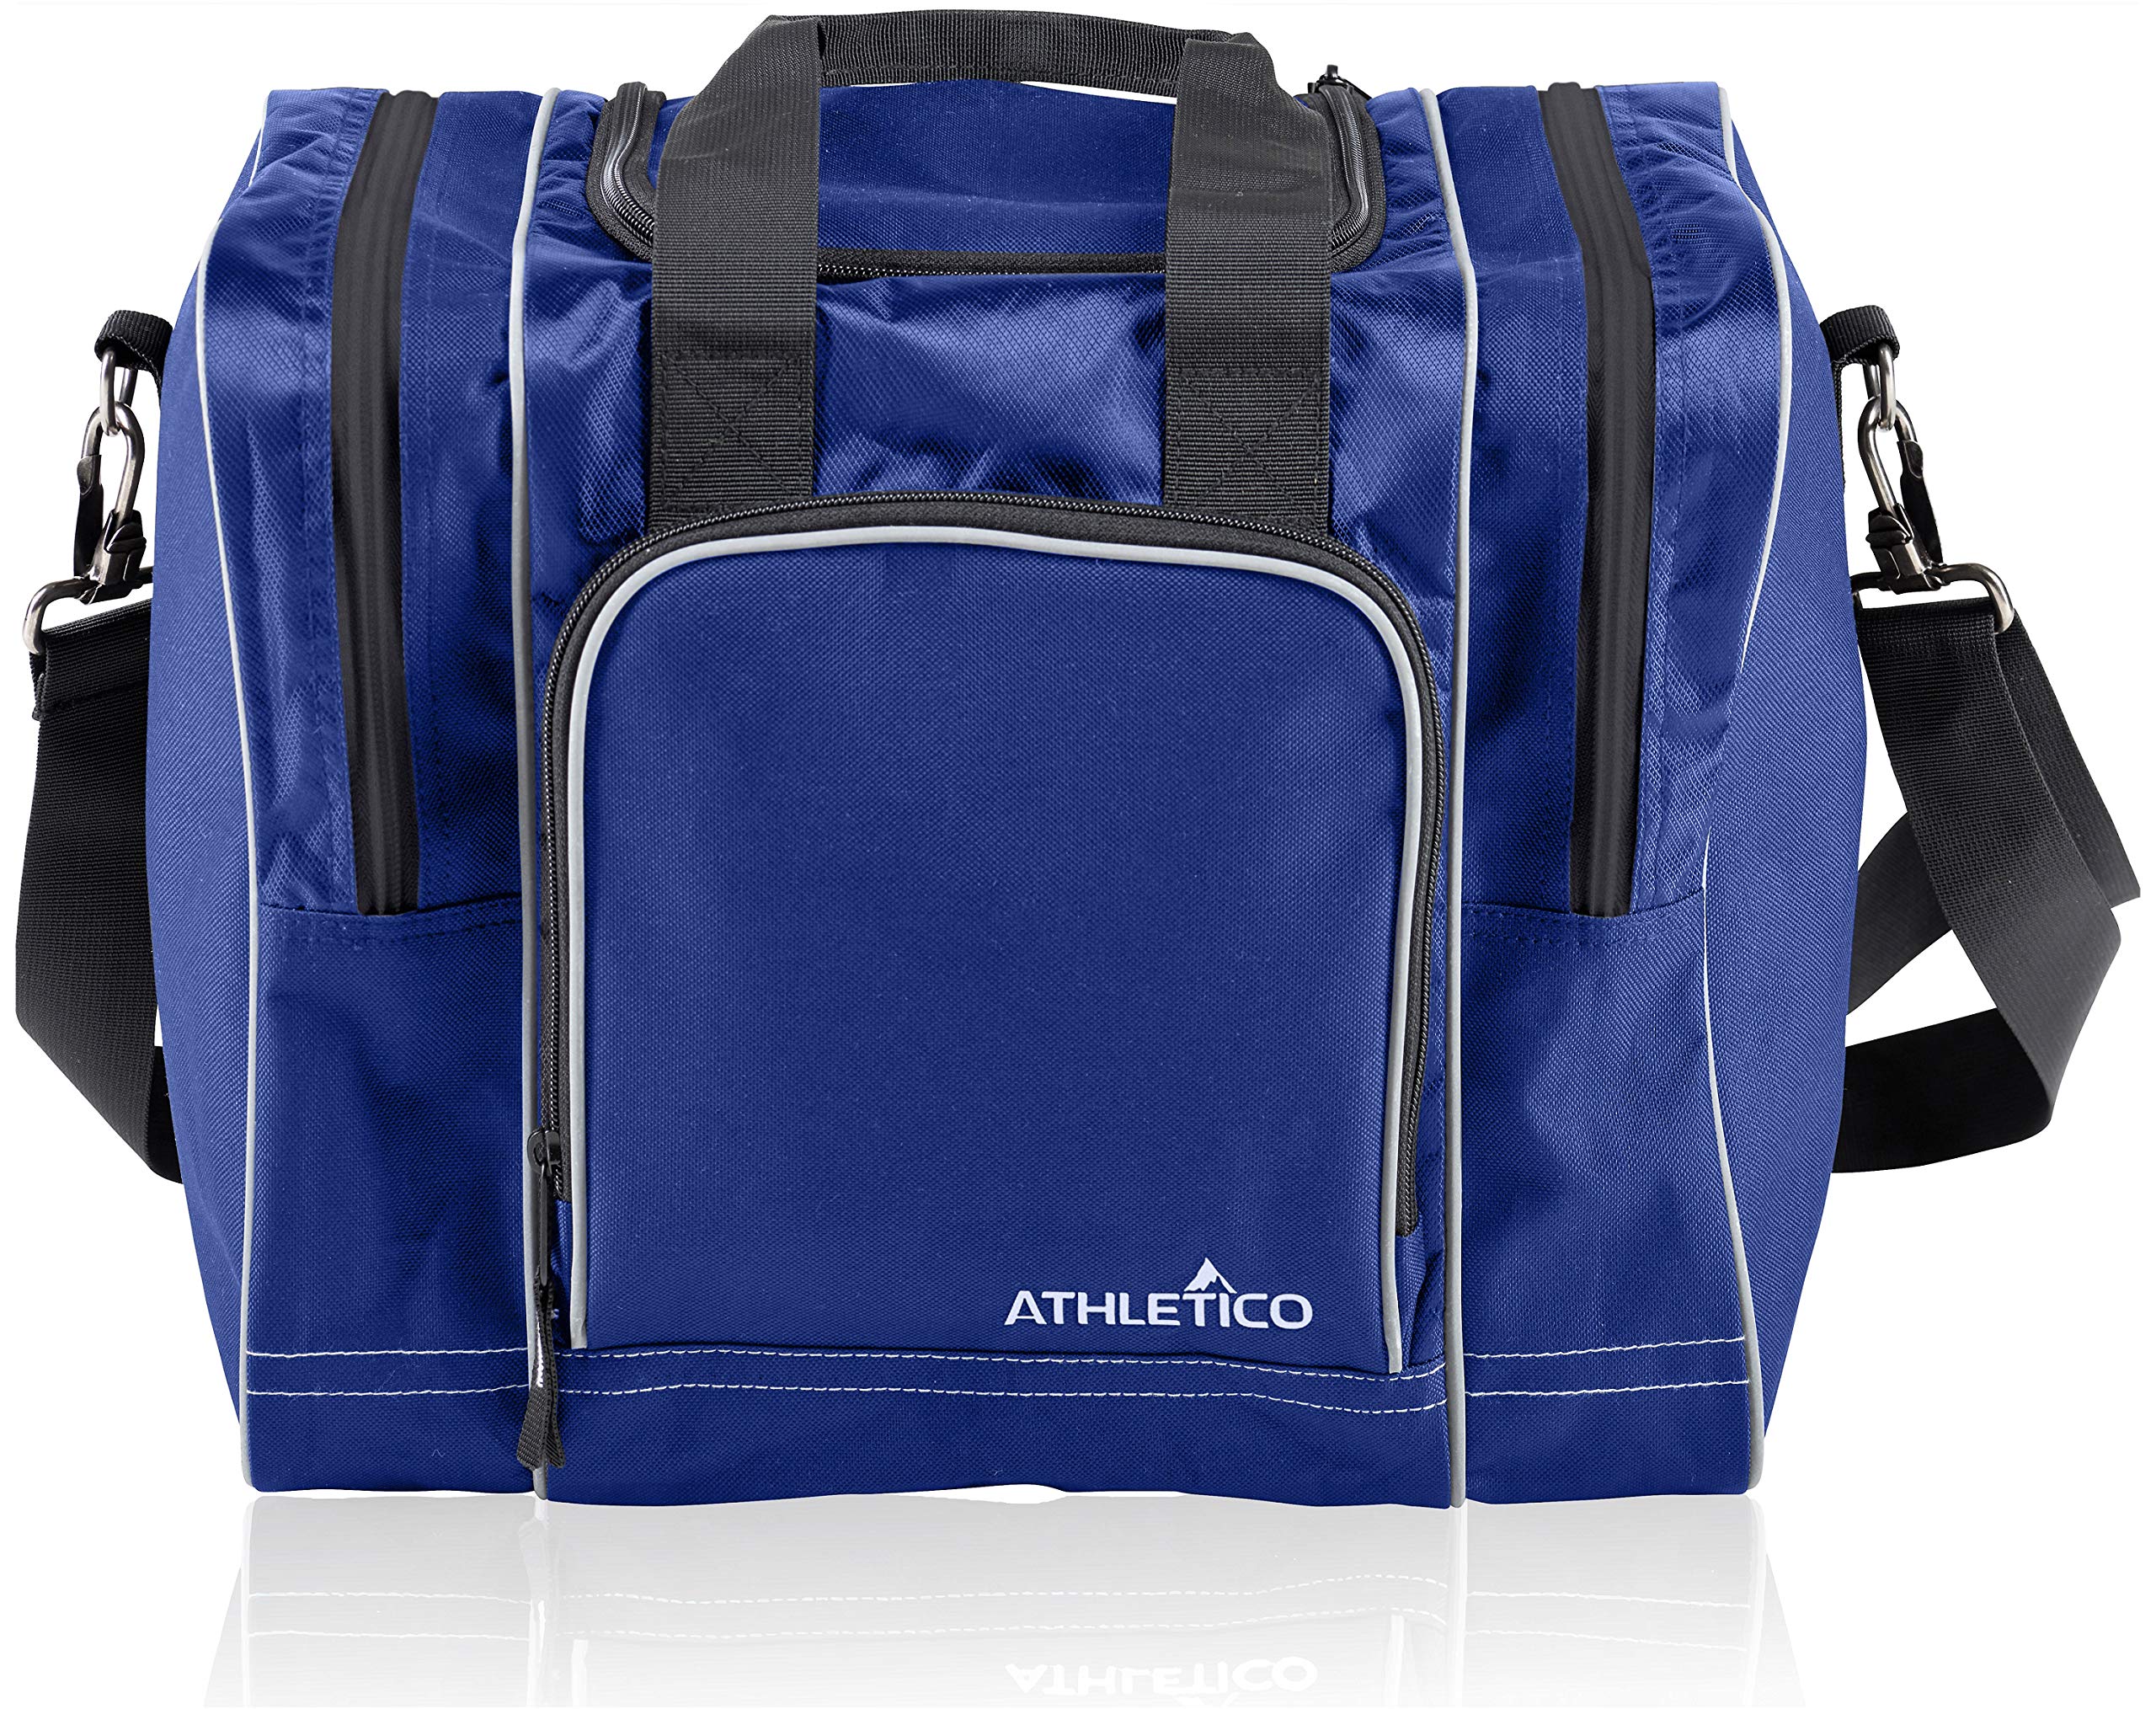 Athletico Bowling Bag for Single Ball - Single Ball Tote Bag With Padded Ball Holder - Fits a Single Pair of Bowling Shoes Up to Mens Size 14 (Blue)  - Acceptable